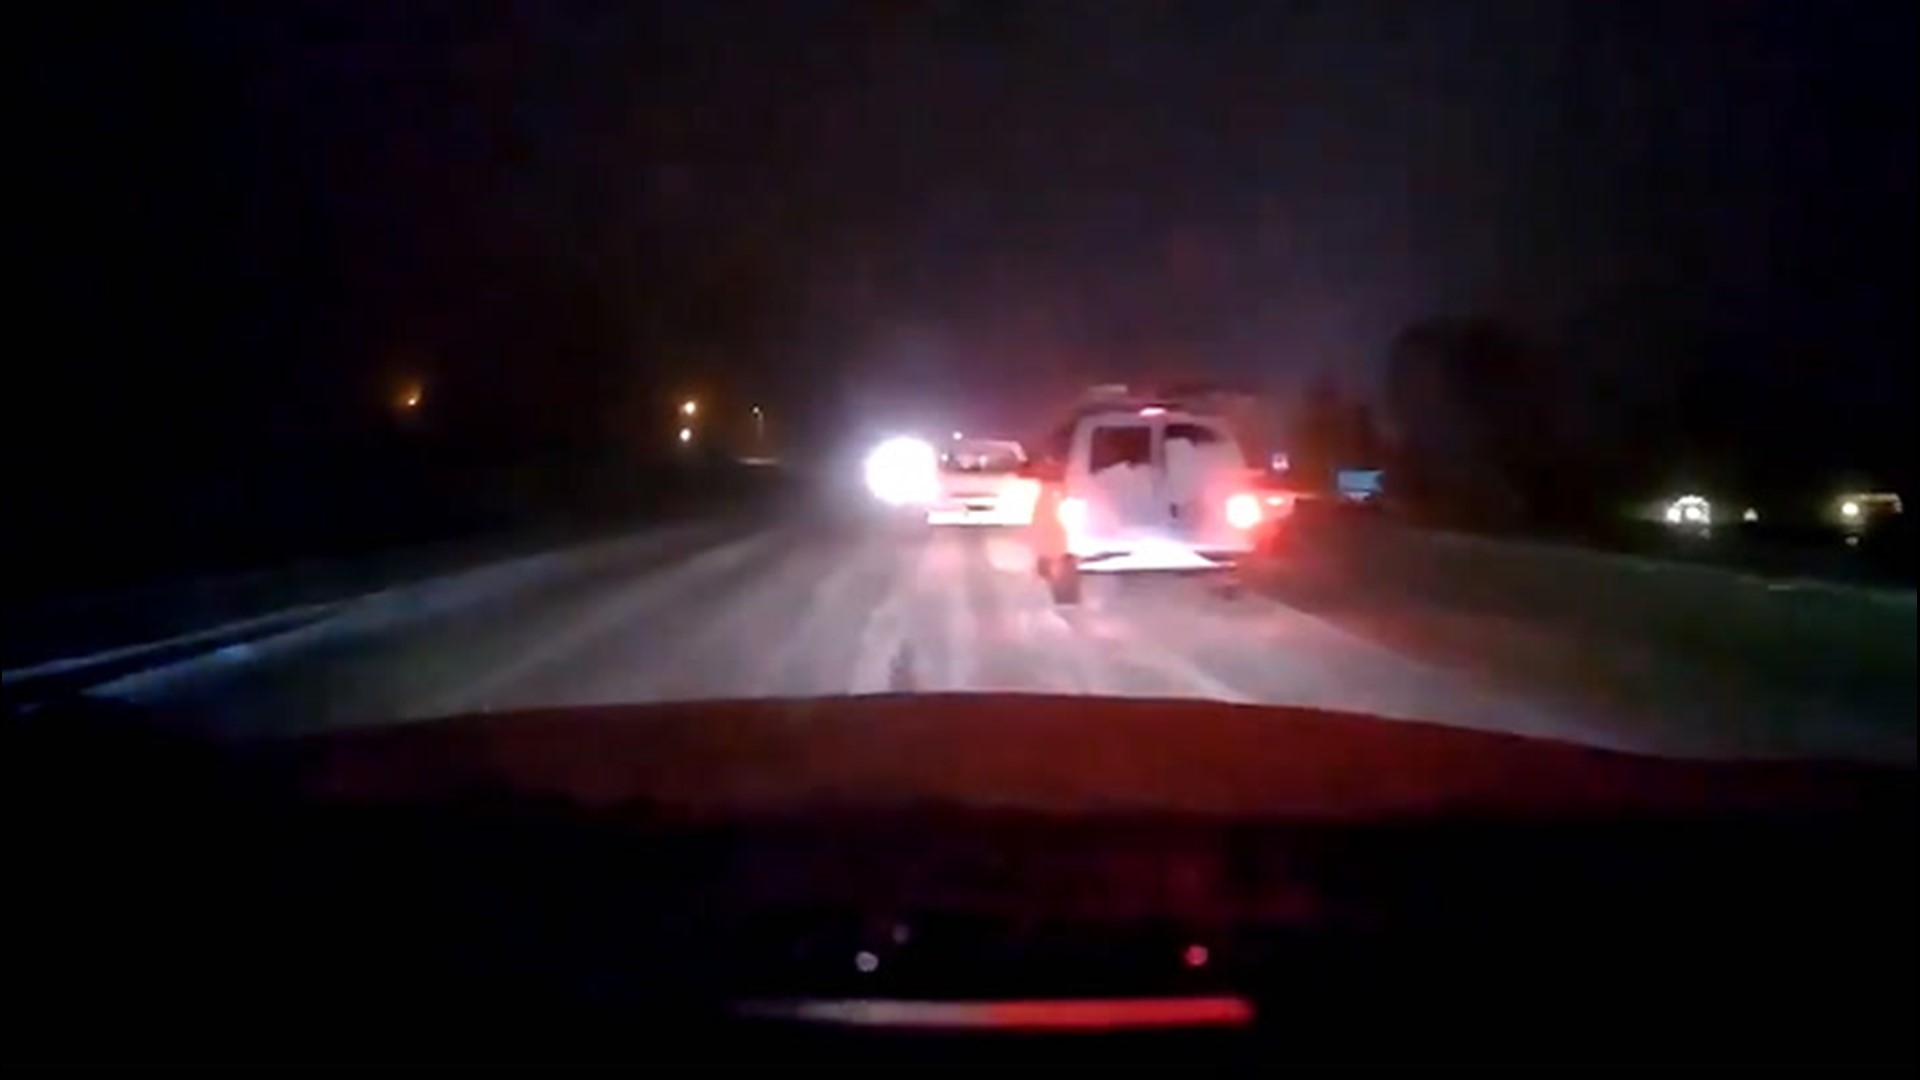 This driver had to dodge several vehicles during her early morning commute in Missoula, Montana, on Feb. 17.